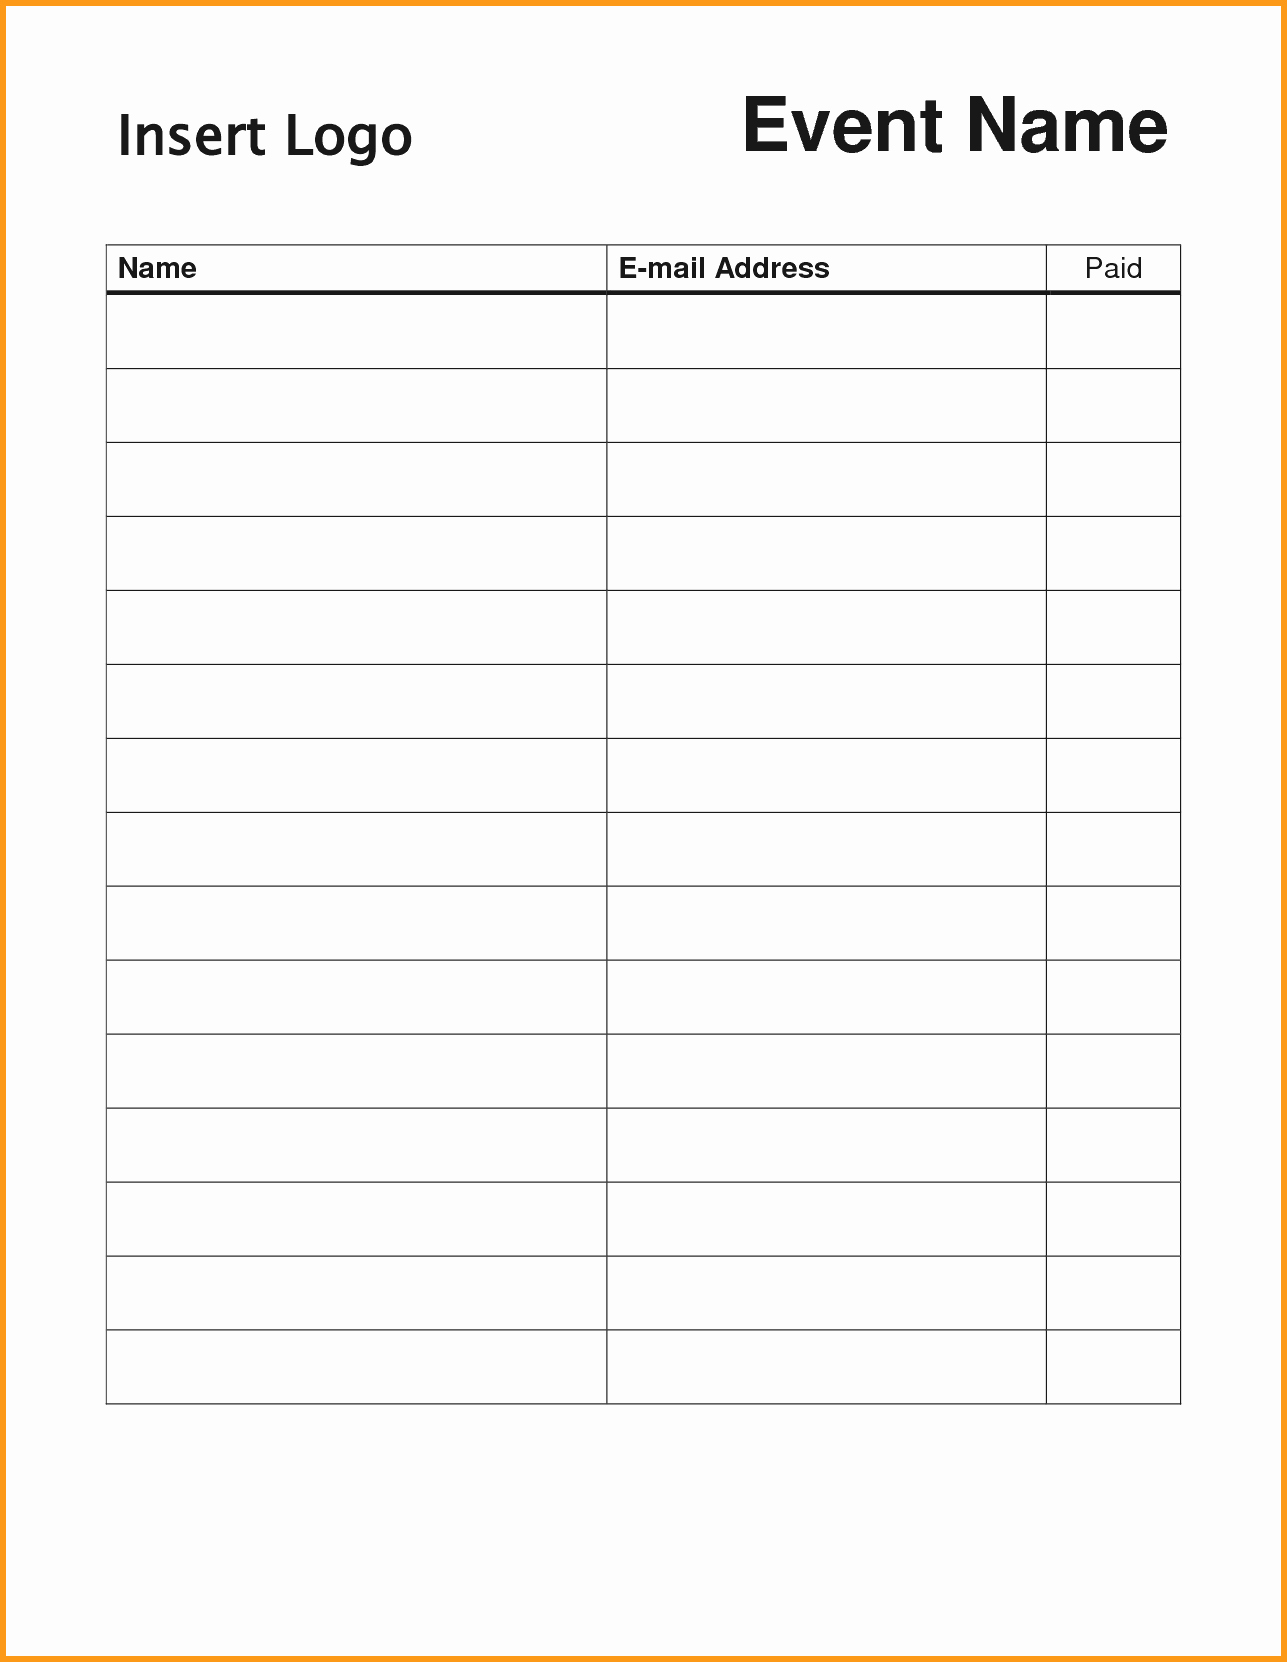 Blank Sign In Sheet Template Best Of Blank Sign Up Sheet Example Mughals